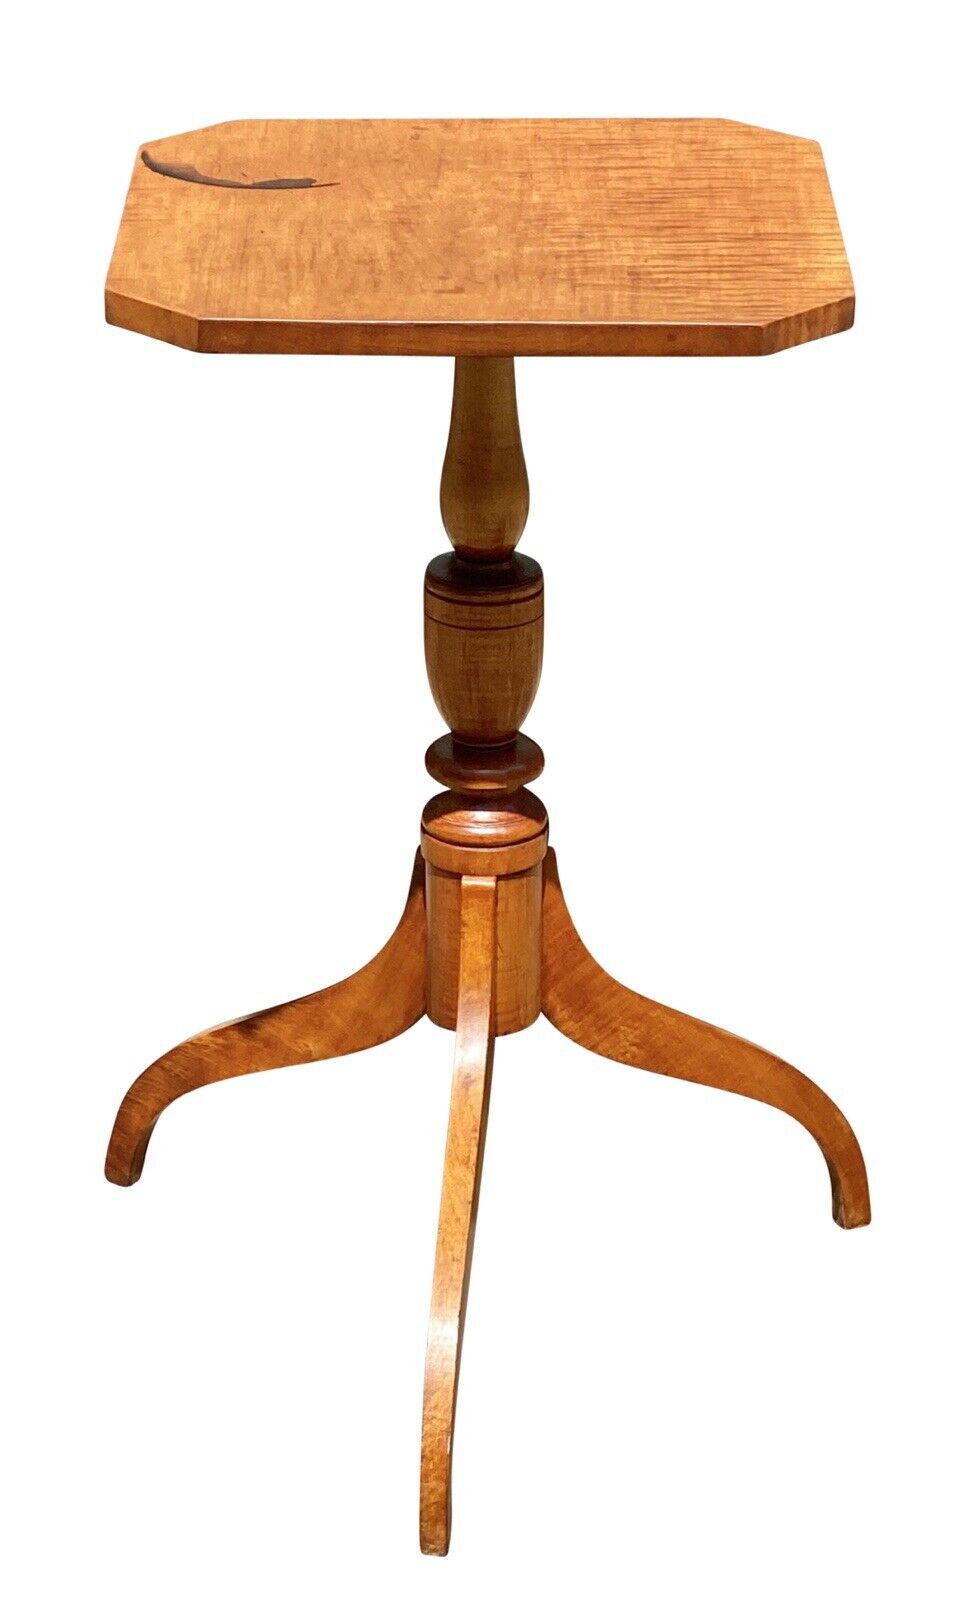 19th C Antique Federal Period Tiger Maple Candlestand / End Table - Curly Maple